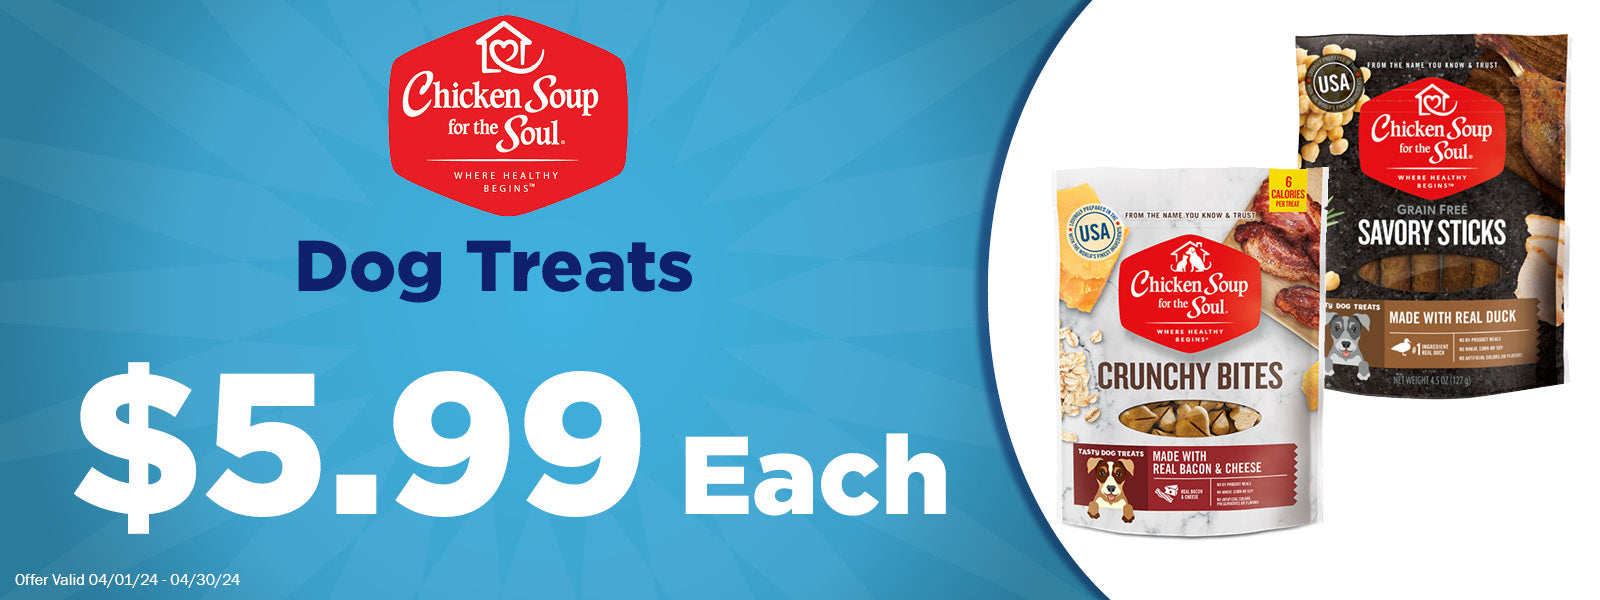 Chicken Soup for the Soul Dog Treats $5.99 Each